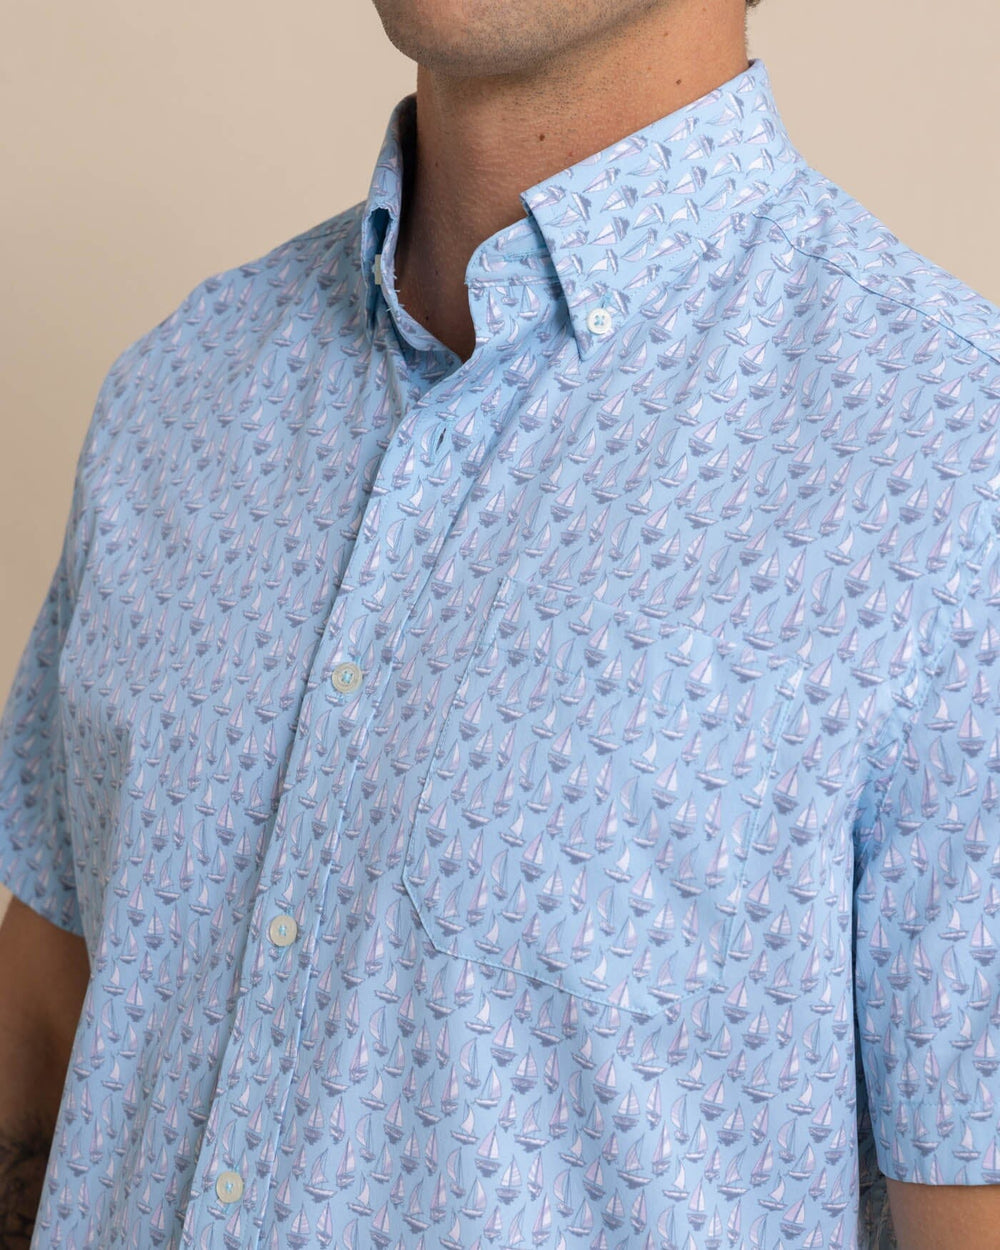 The detail view of the Southern Tide Intercoastal Forget A-Boat It Short Sleeve SportShirt by Southern Tide - Clearwater Blue